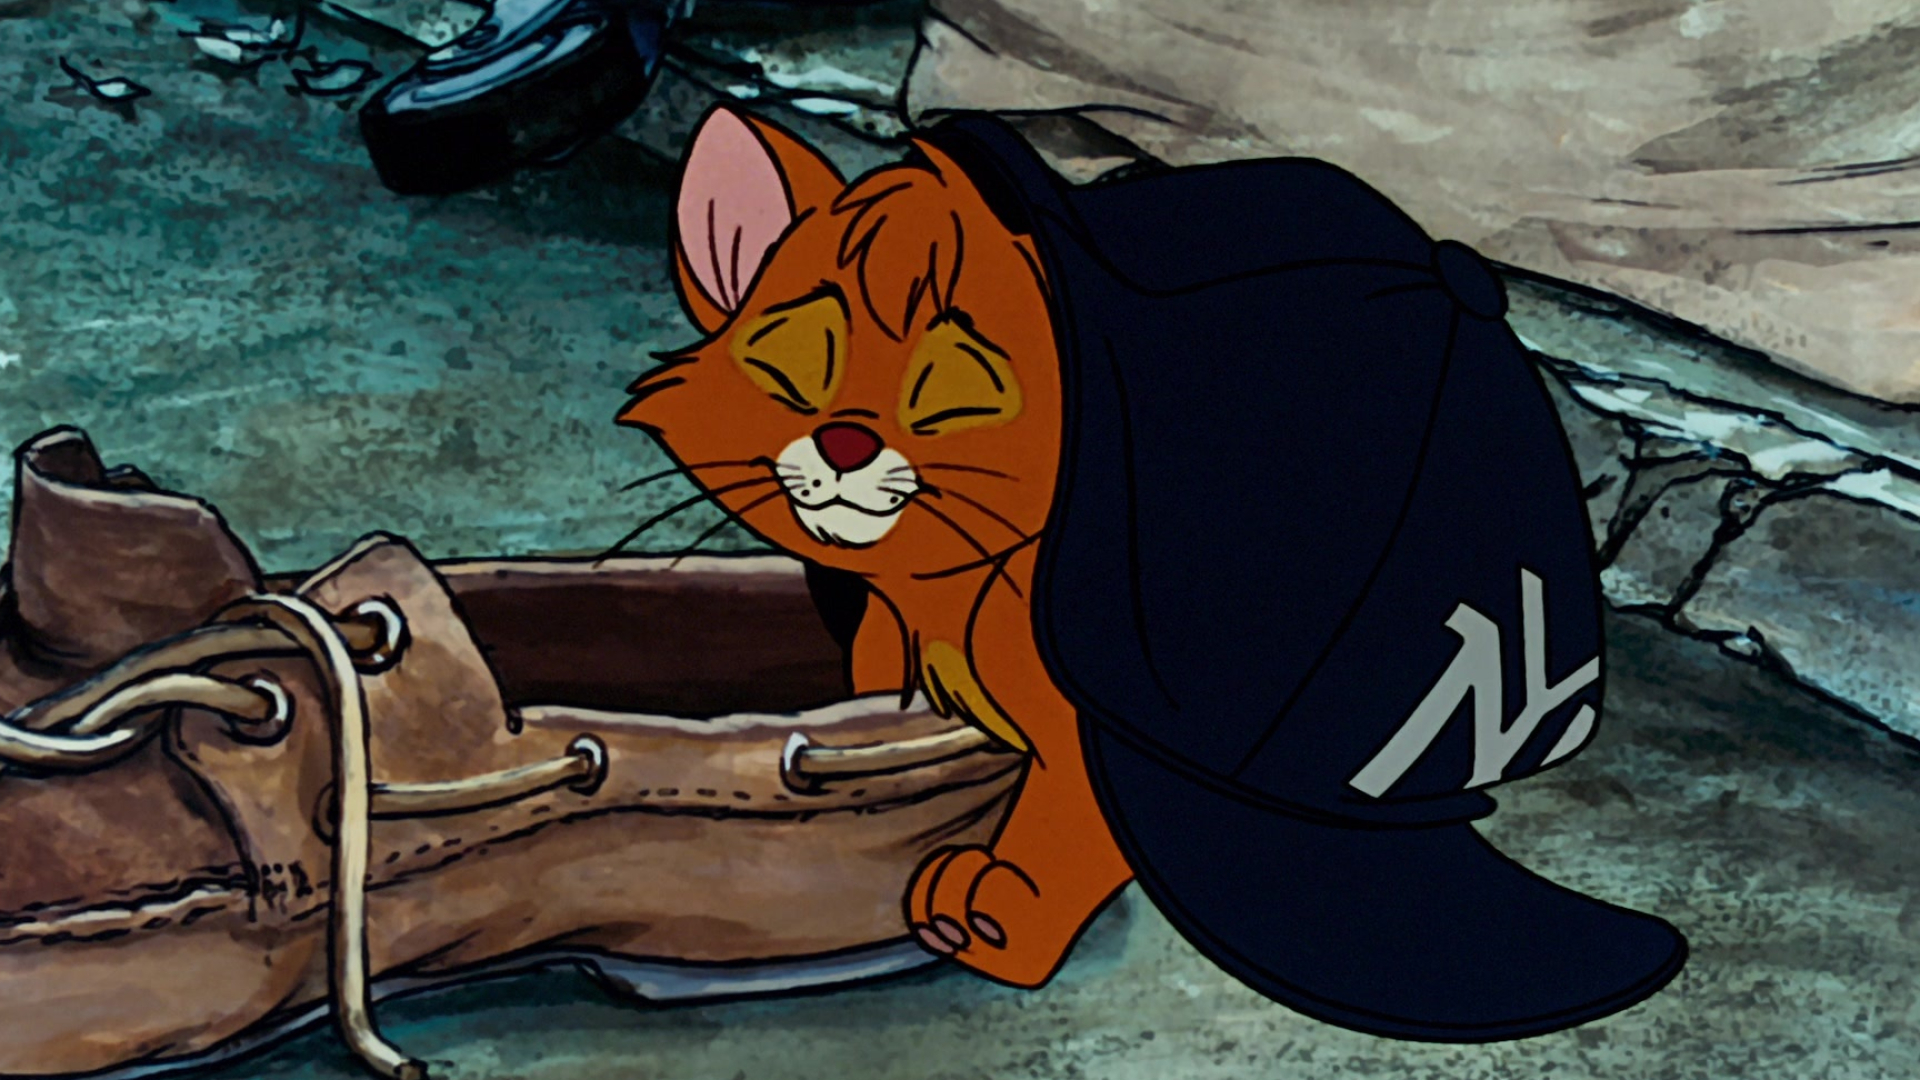 Oliver and Company, 1988 film, New York Yankees, Iconic cap, 1920x1080 Full HD Desktop